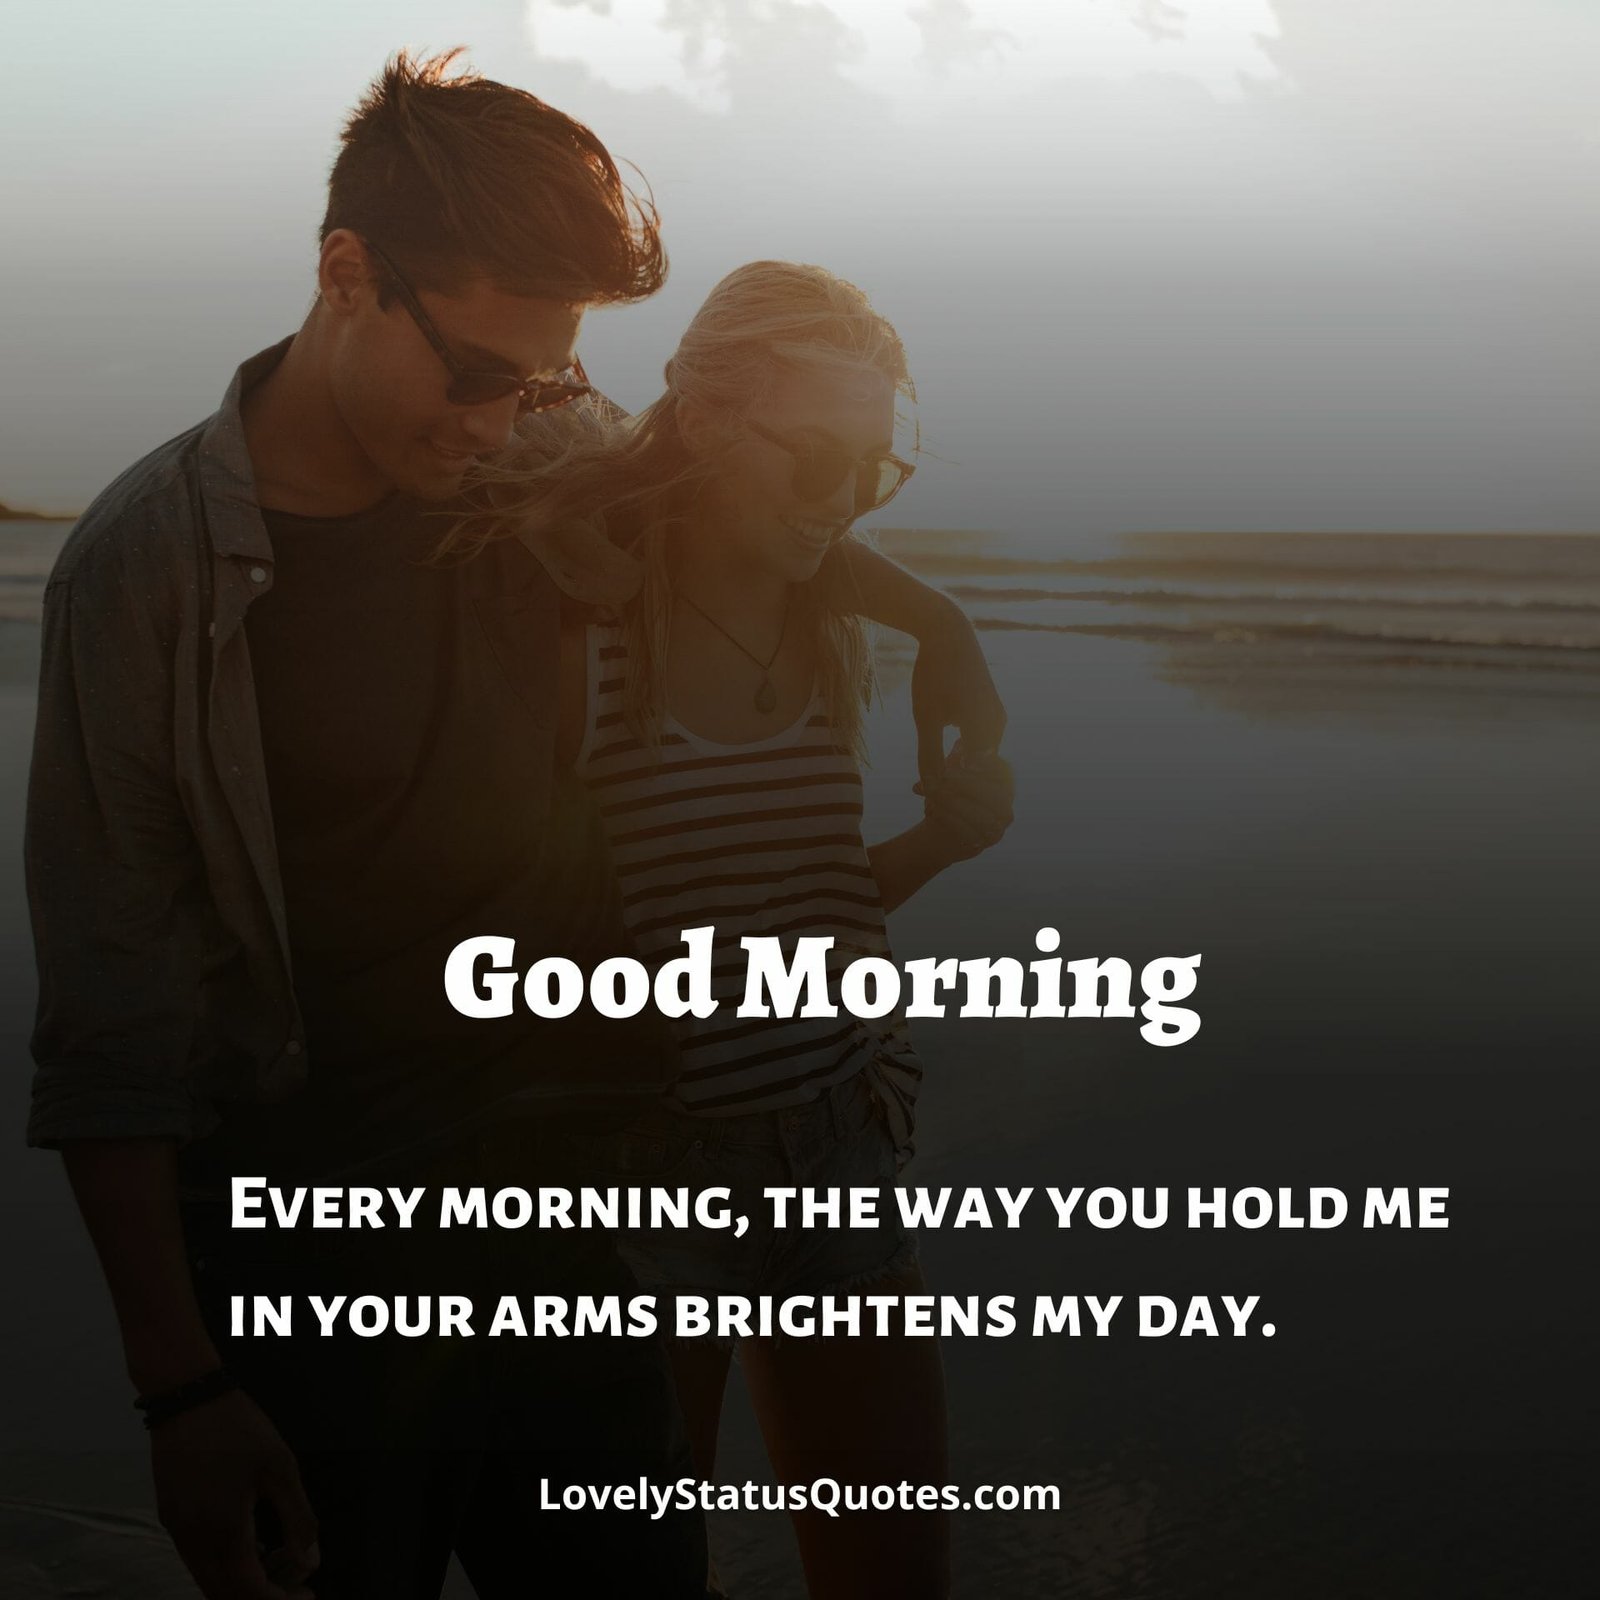 New good morning messages with images